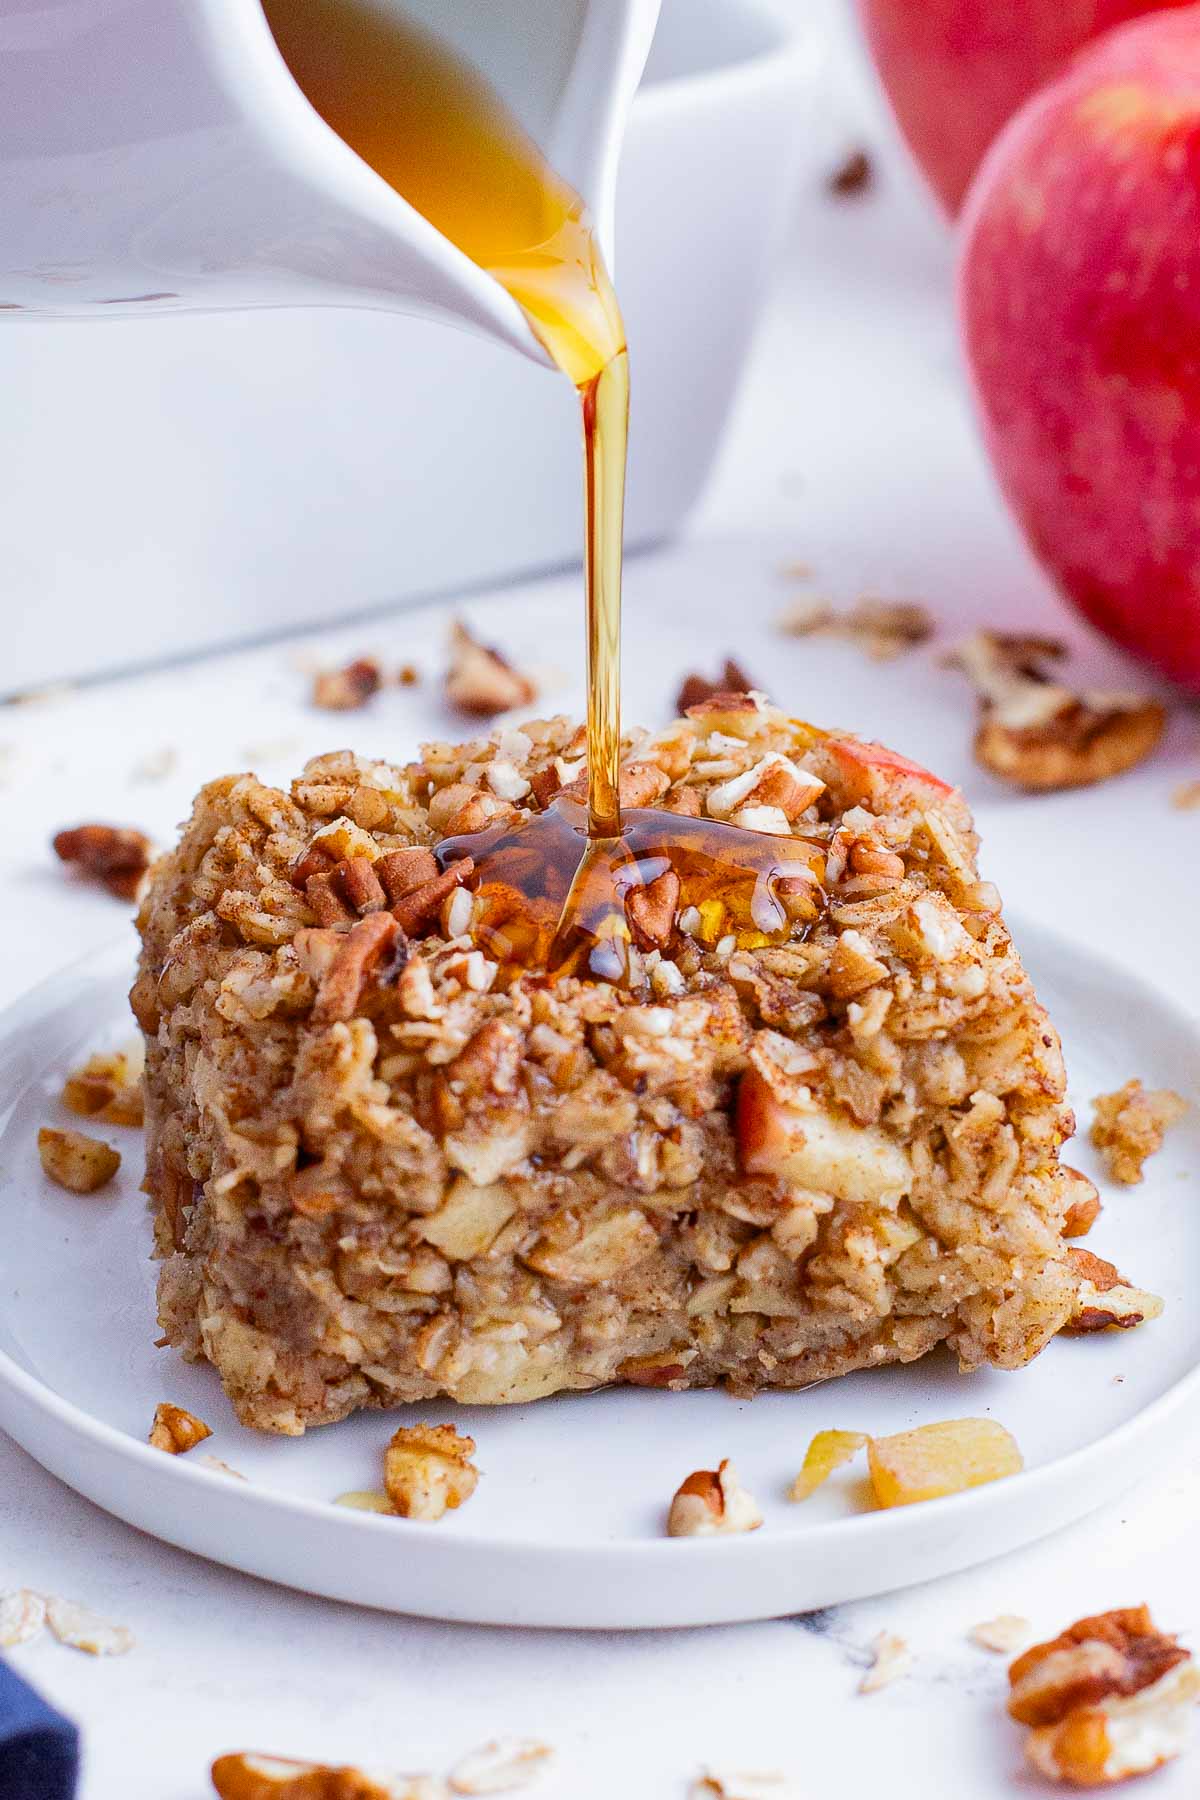 Maple syrup is poured over a serving of baked apple oatmeal.